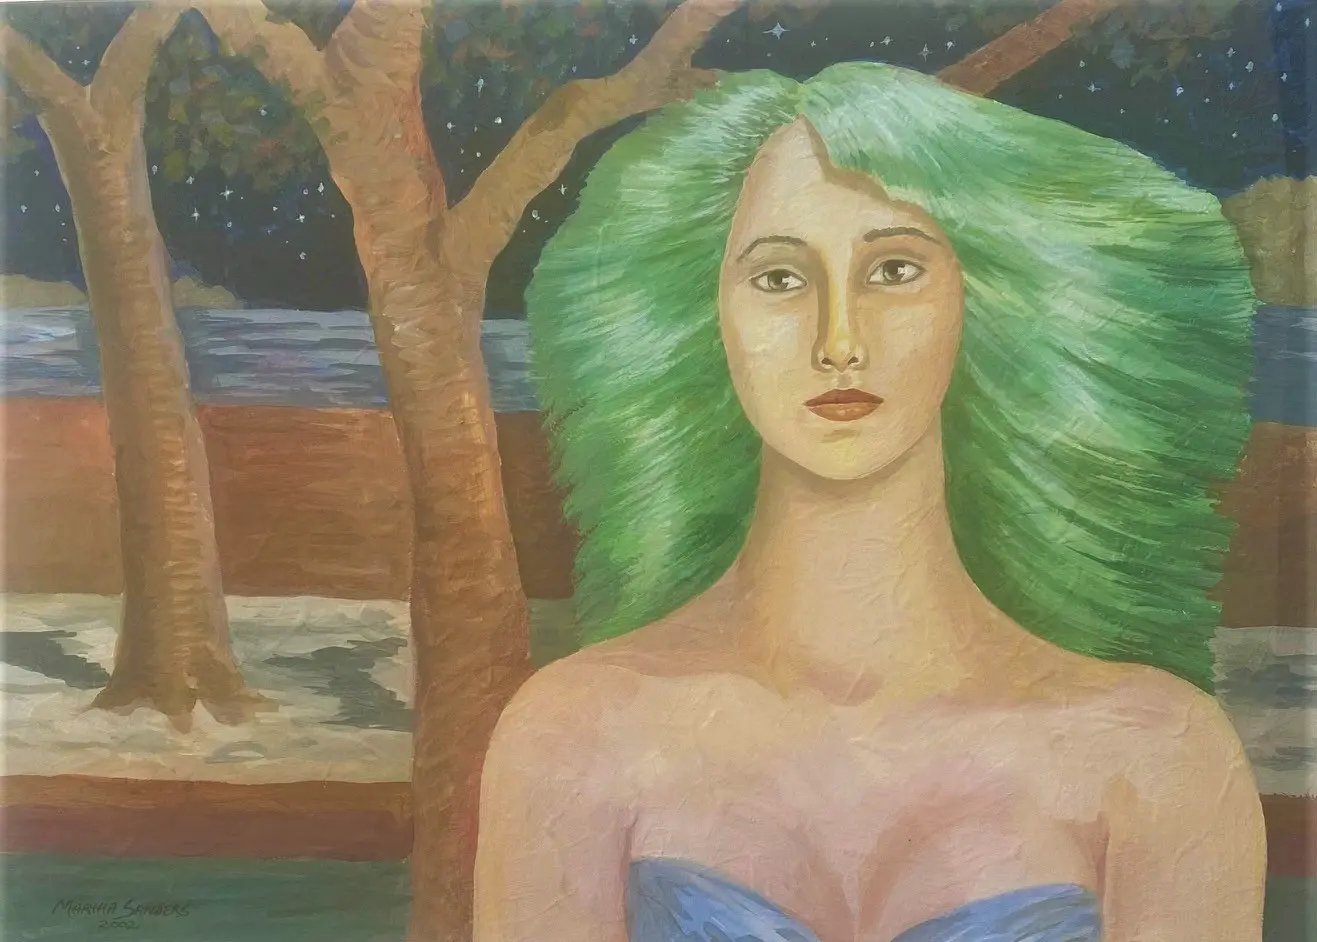 A painting of a woman with green hair